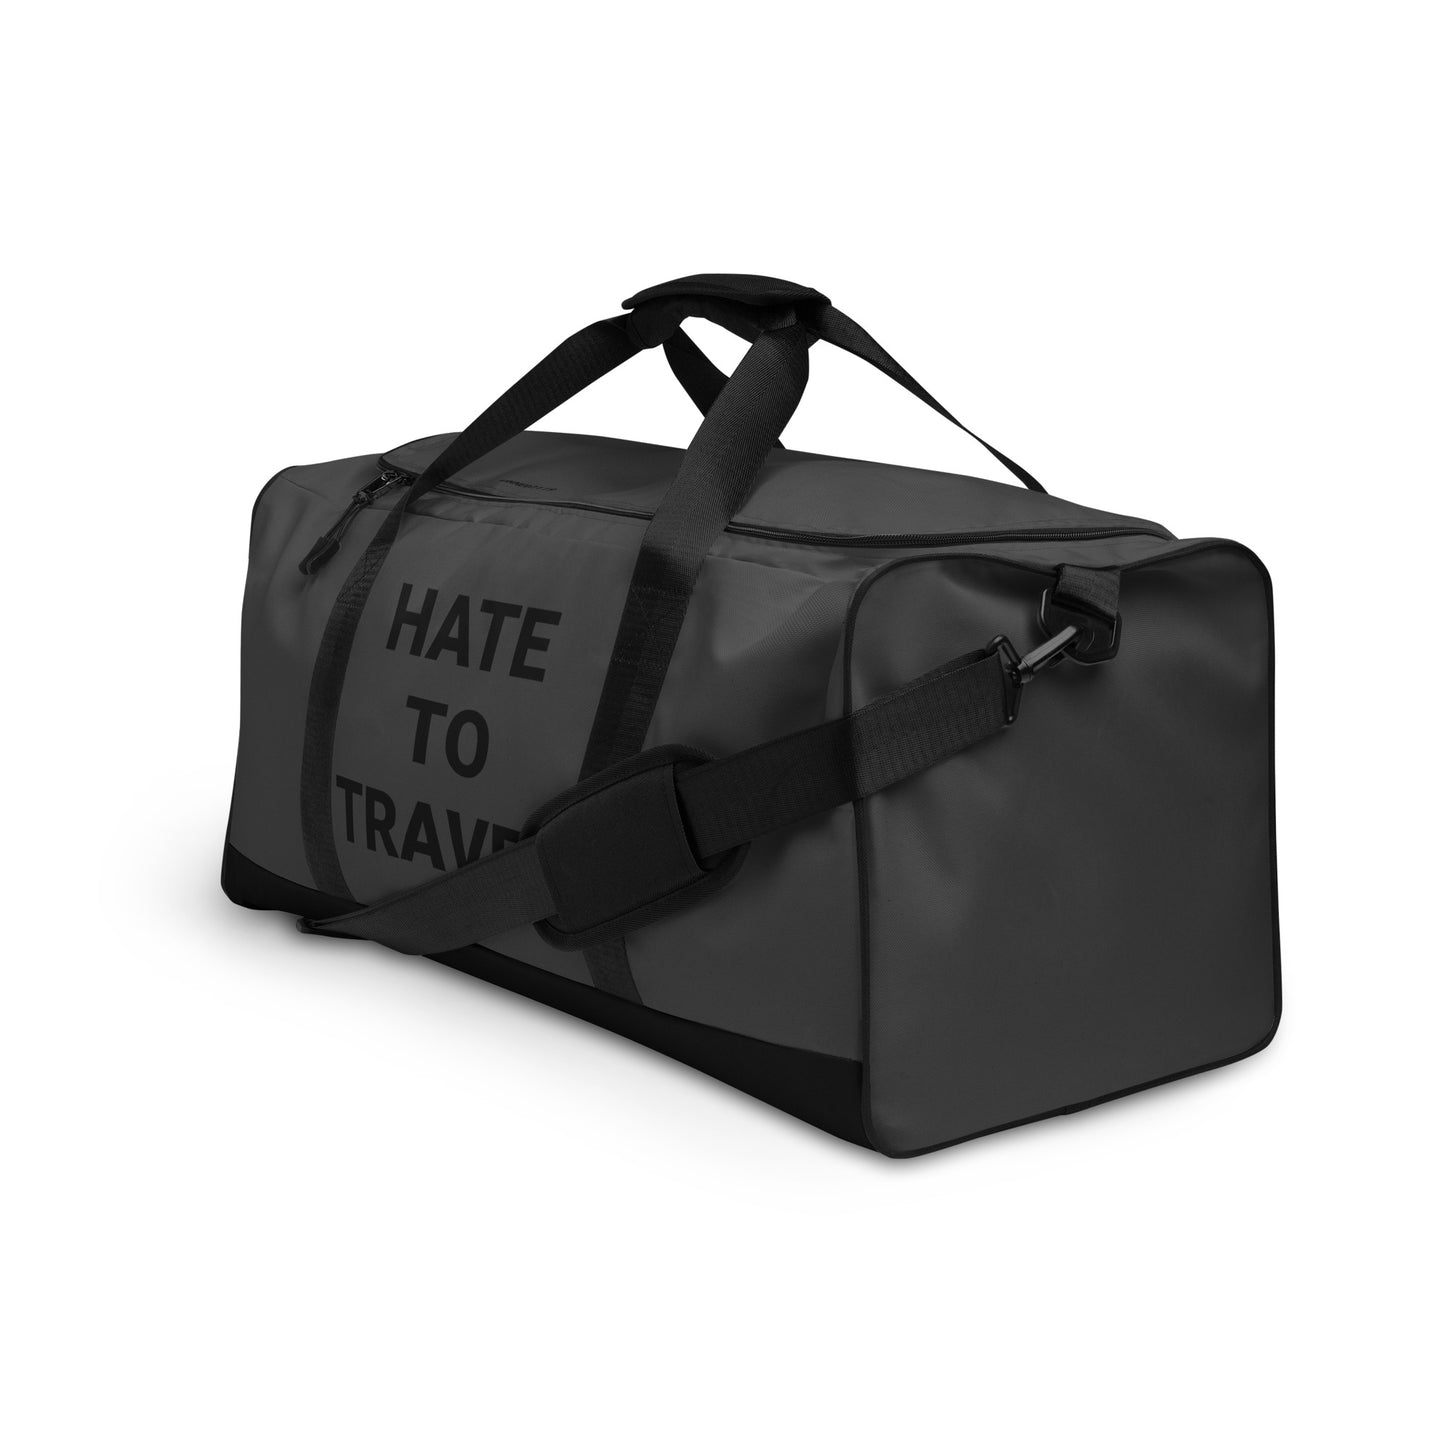 Hate to travel duffle bag - MUCH NICER